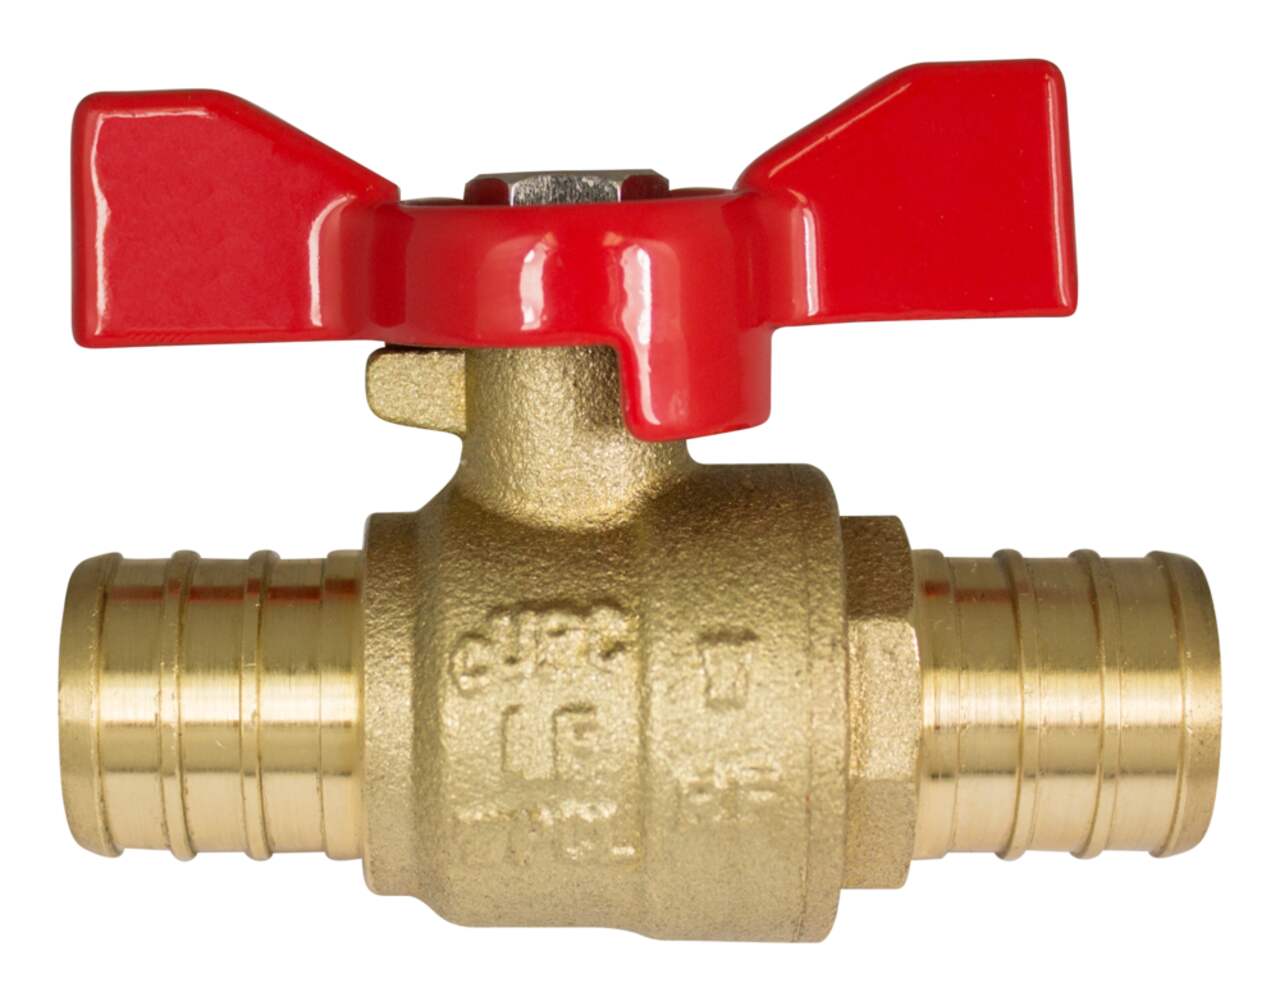 Waterline Solid Brass Tee Fitting for PEX Pipe, 3/4 x 3/4 x 1/2-in